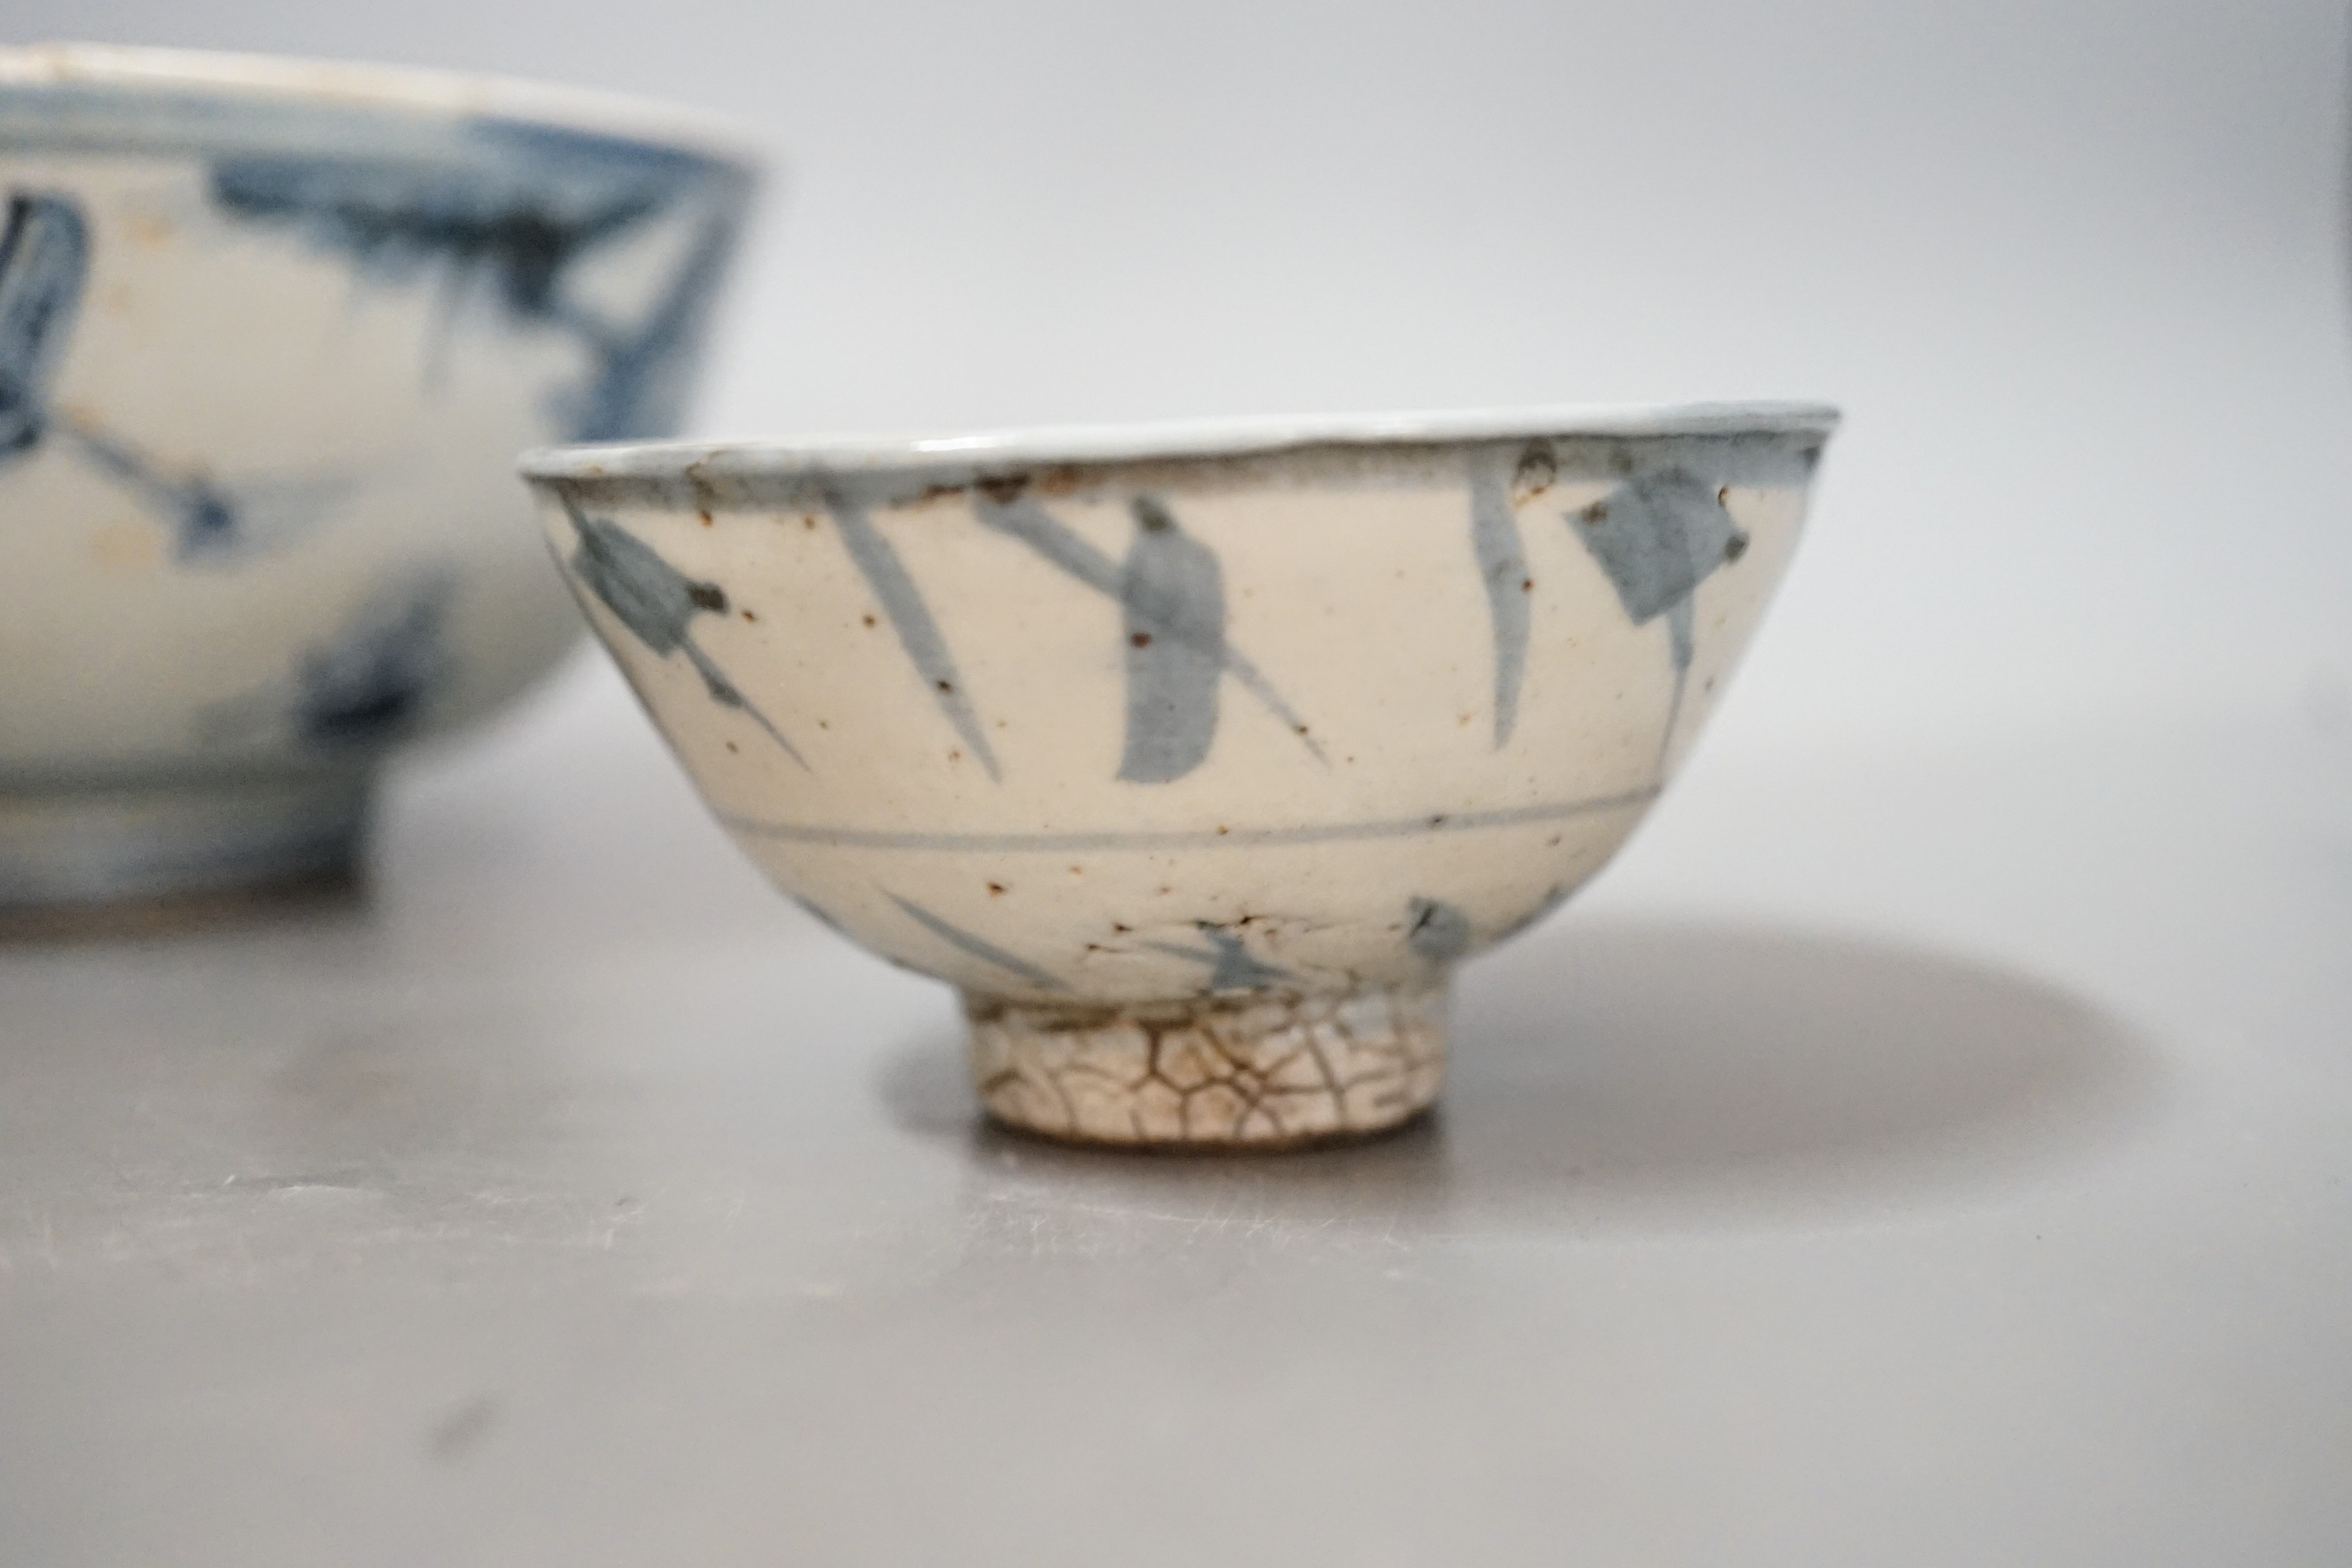 Three Chinese late Ming blue and white bowls, one painted with figures in a boat on horseback and in the landscape, the second with floral sprays, with ‘Made in the Great Ming dynasty’ mark and another bowl, largest 13.3